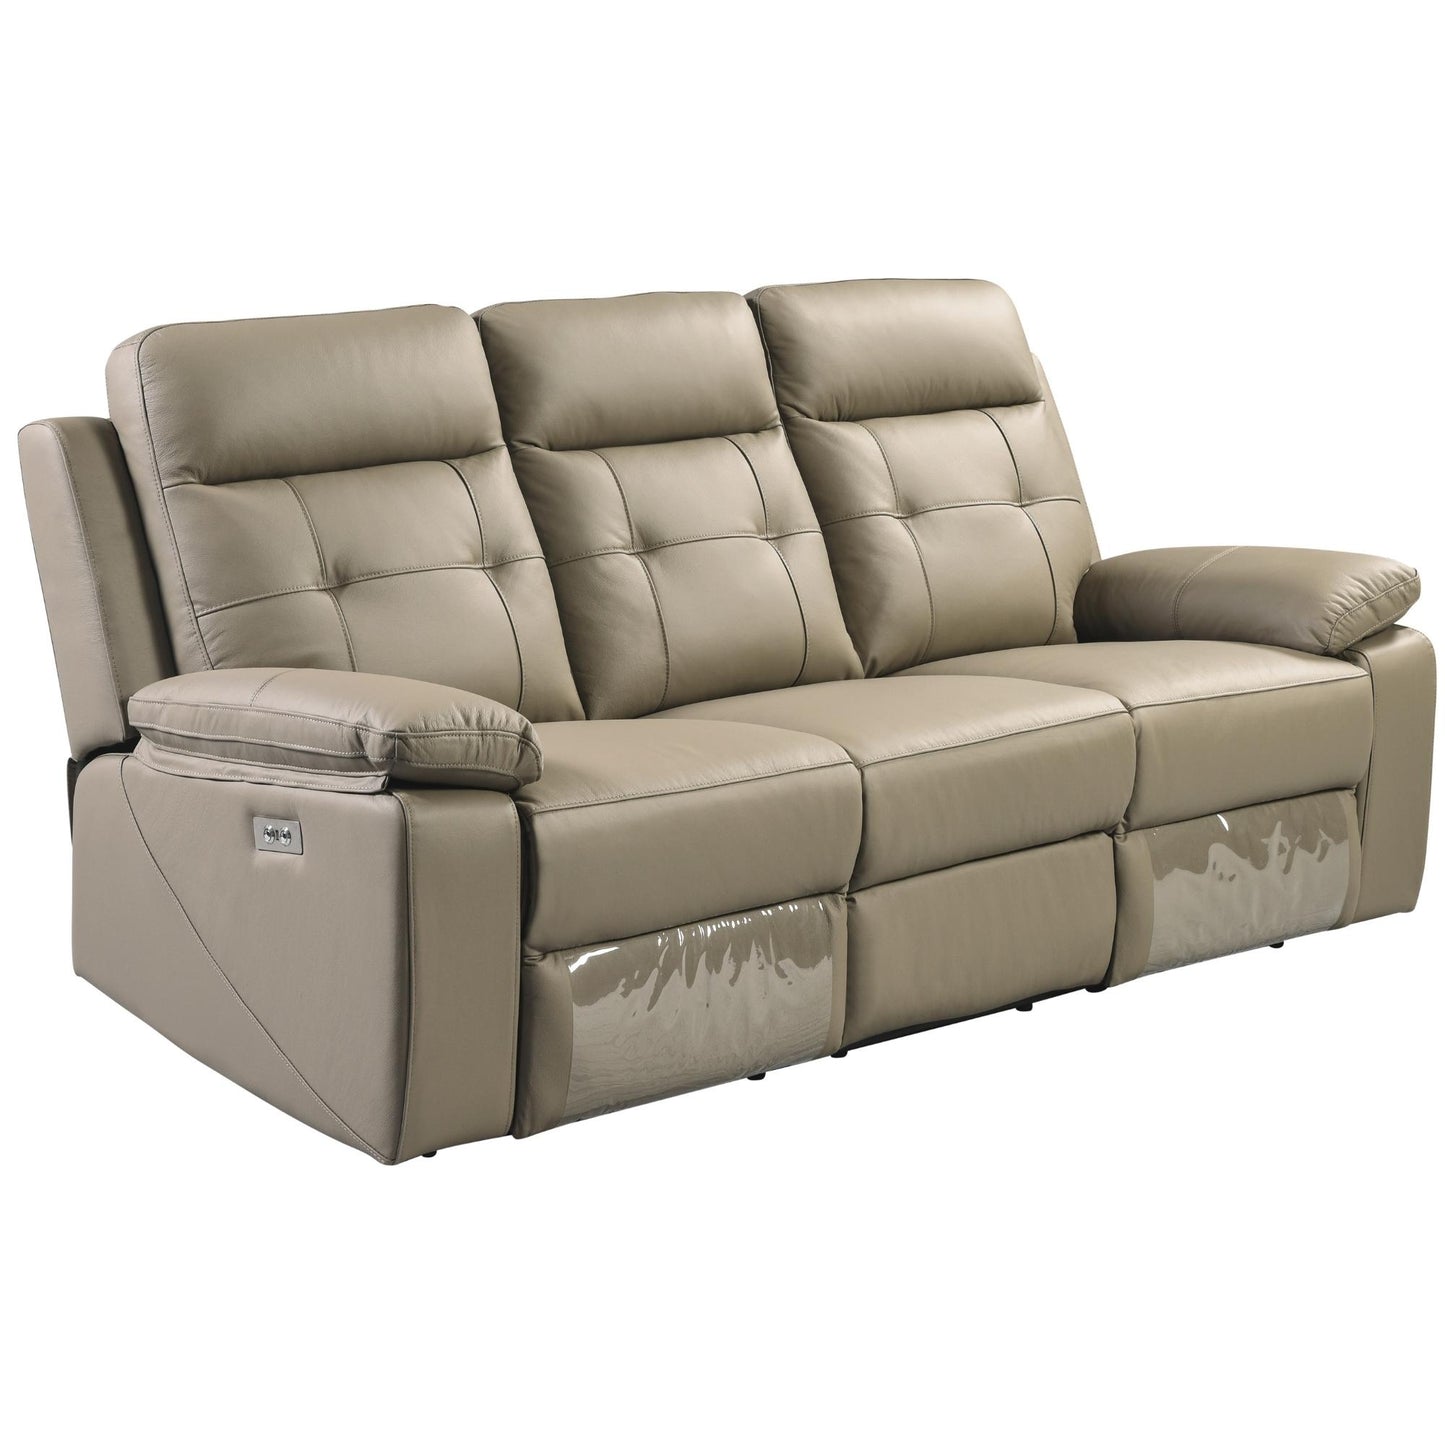 Kingsman 3 + 2 Seater Electric Recliner Sofa Genuine Leather Home Theater Lounge